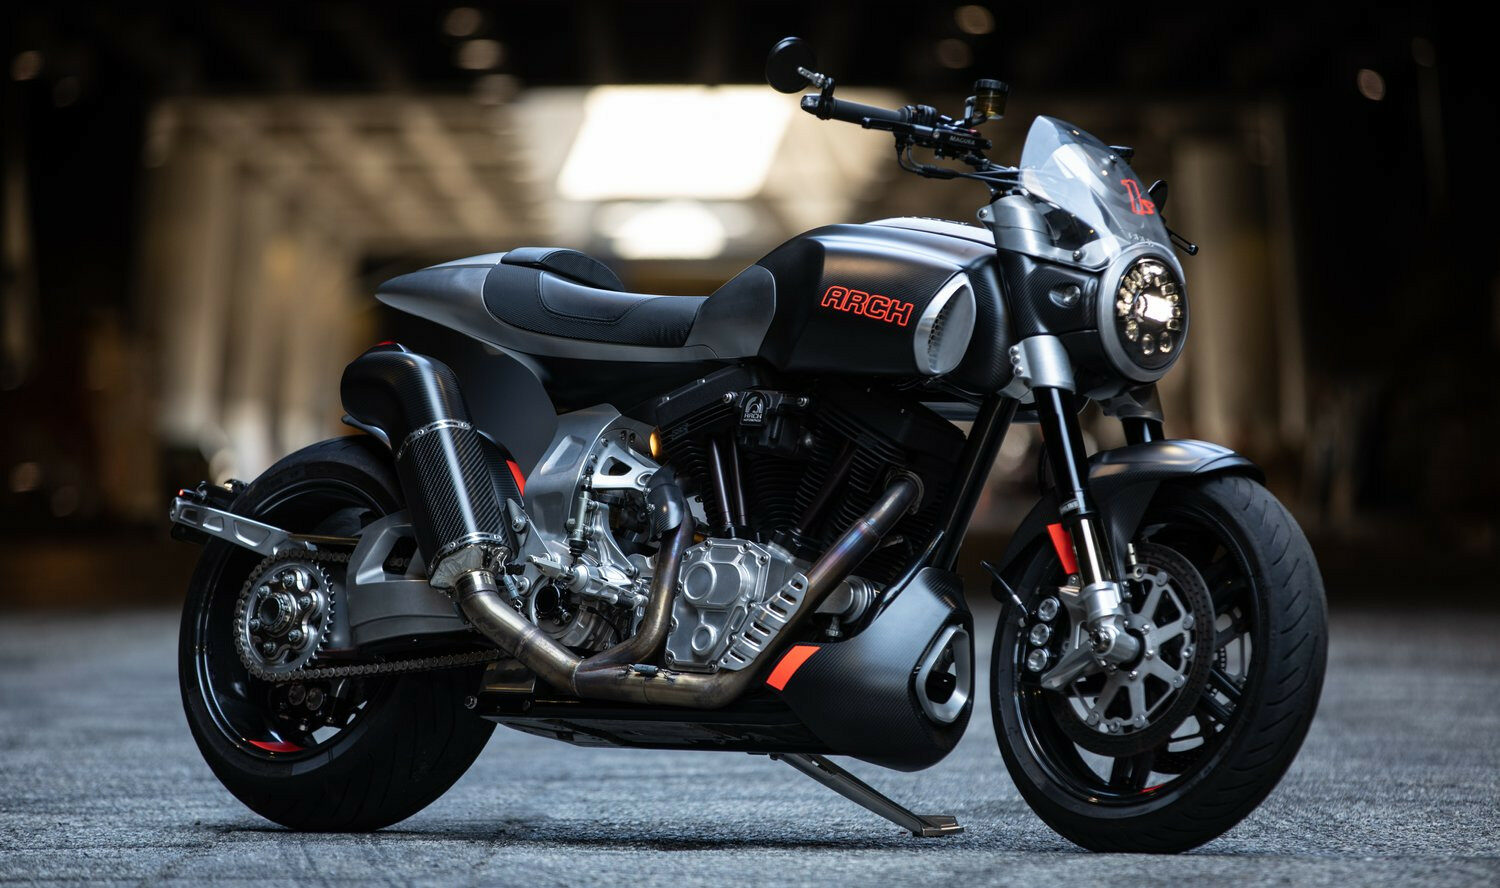 bao john wick is the founder of arch motorcycle company which is considering the possibility of adding an electric vehicle line to its product portfolio 651d5dd6e8e56 John Wick Is The Founder Of Arch Motorcycle Company, Which Is Considering The Possibility Of Adding An Electric Vehicle Line To Its Product Portfolio